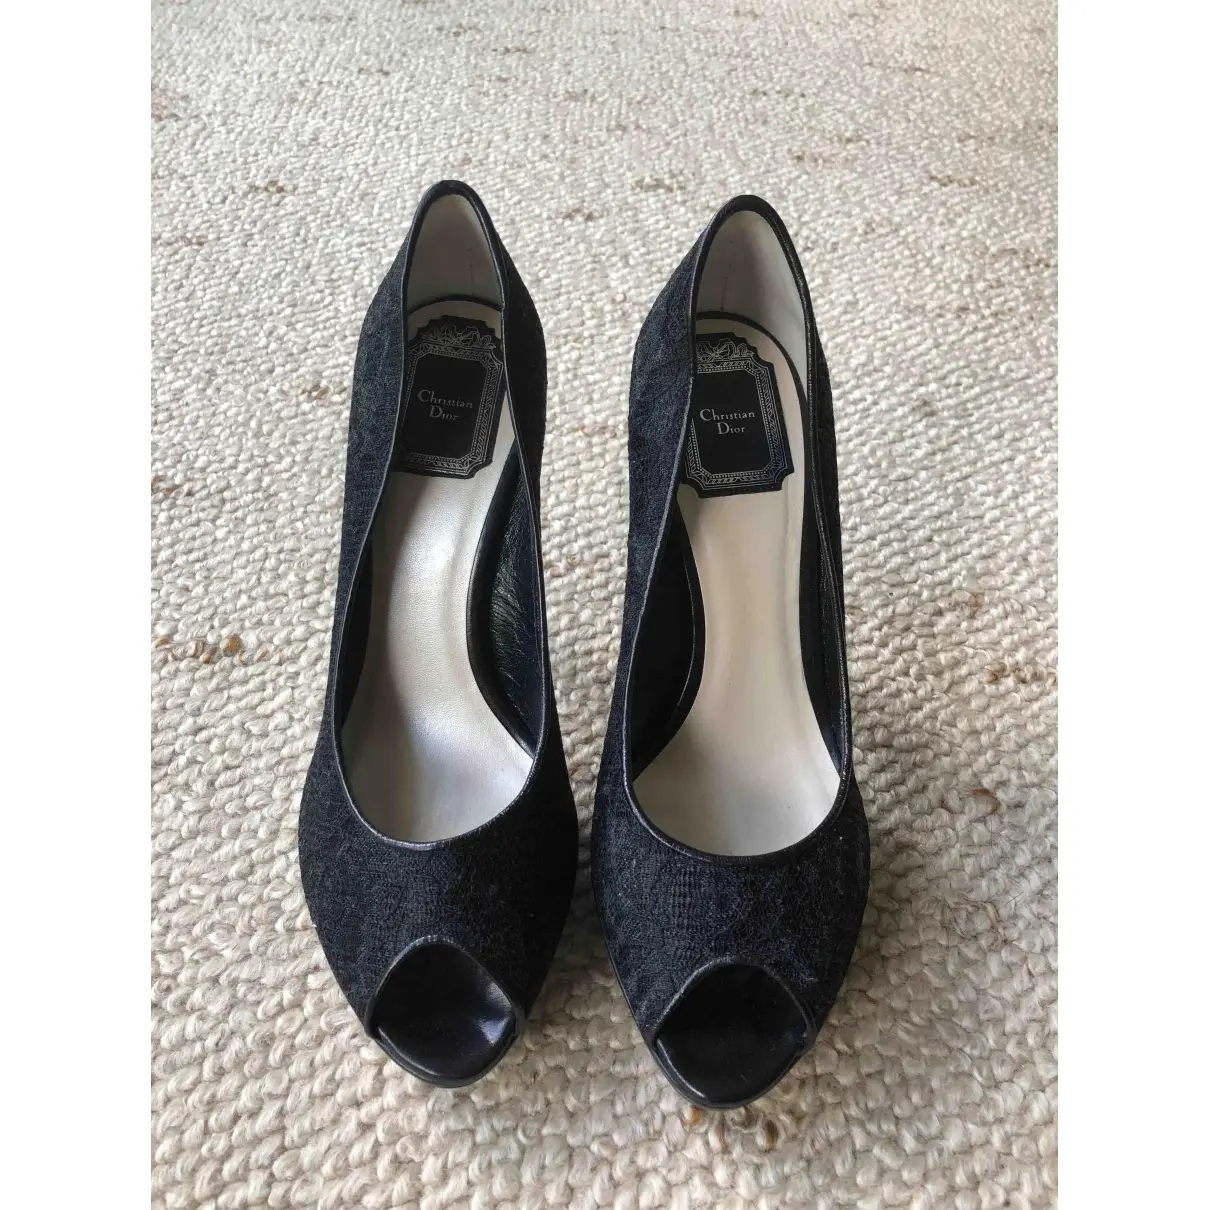 Dior Miss Dior Peep Toes leather heels for sale